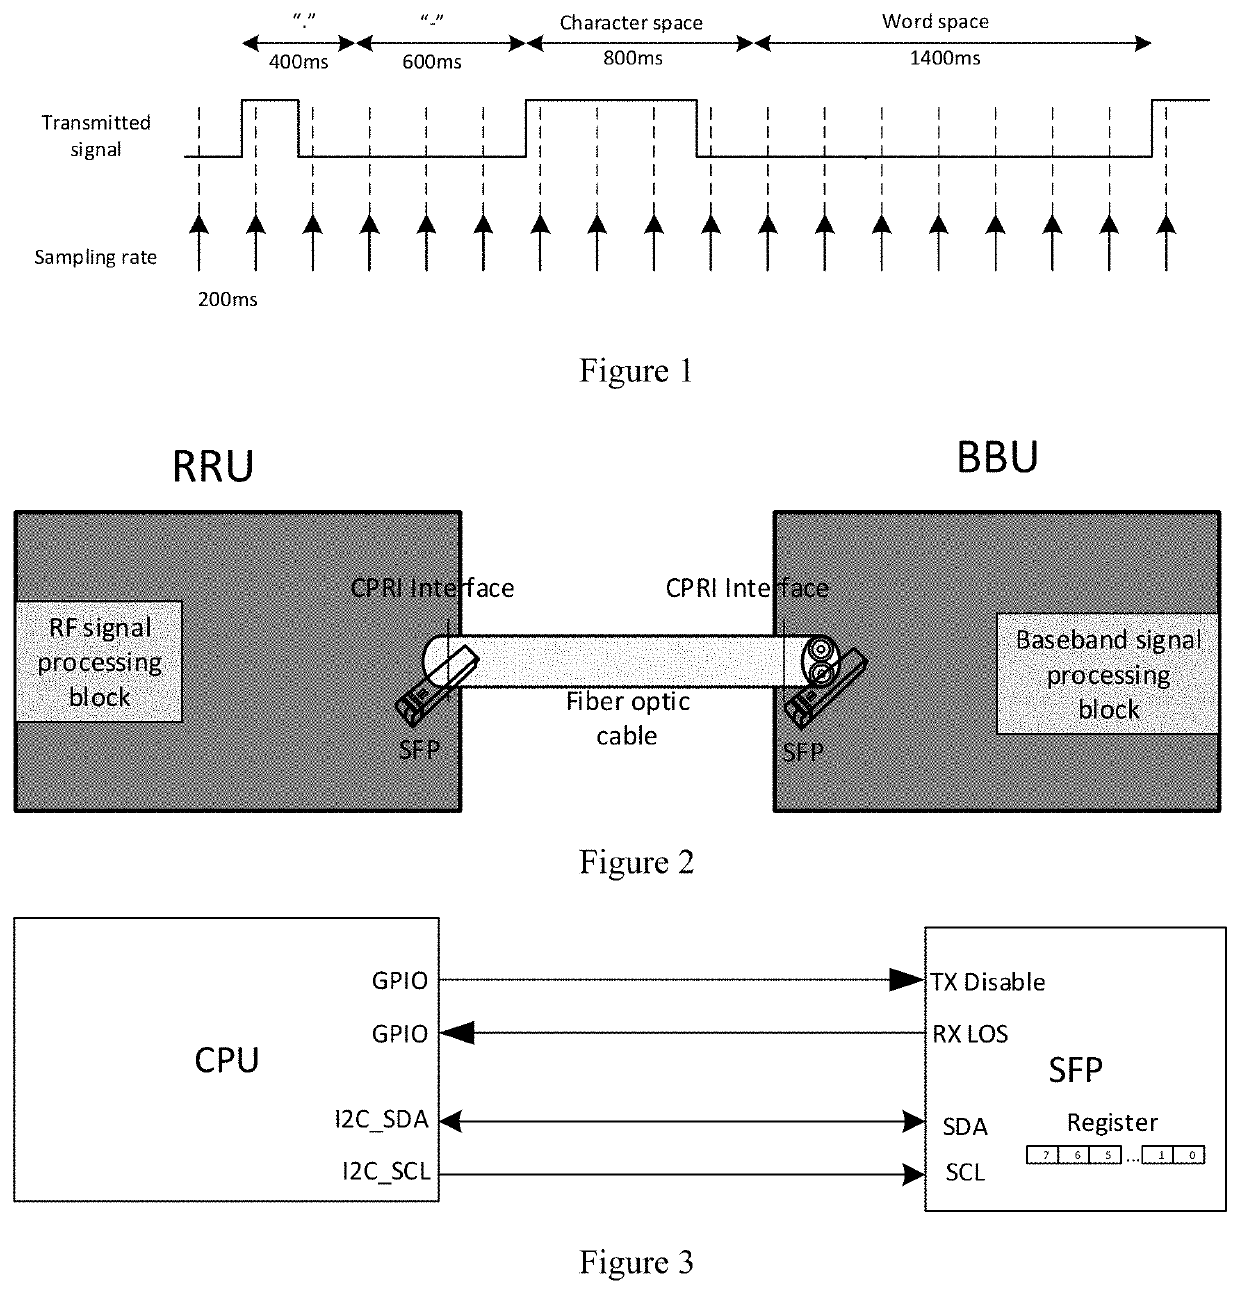 Method of exchange of information between radio remote unit and baseband unit in 4g LTE network when loss of synchronous signals on common public radio interface